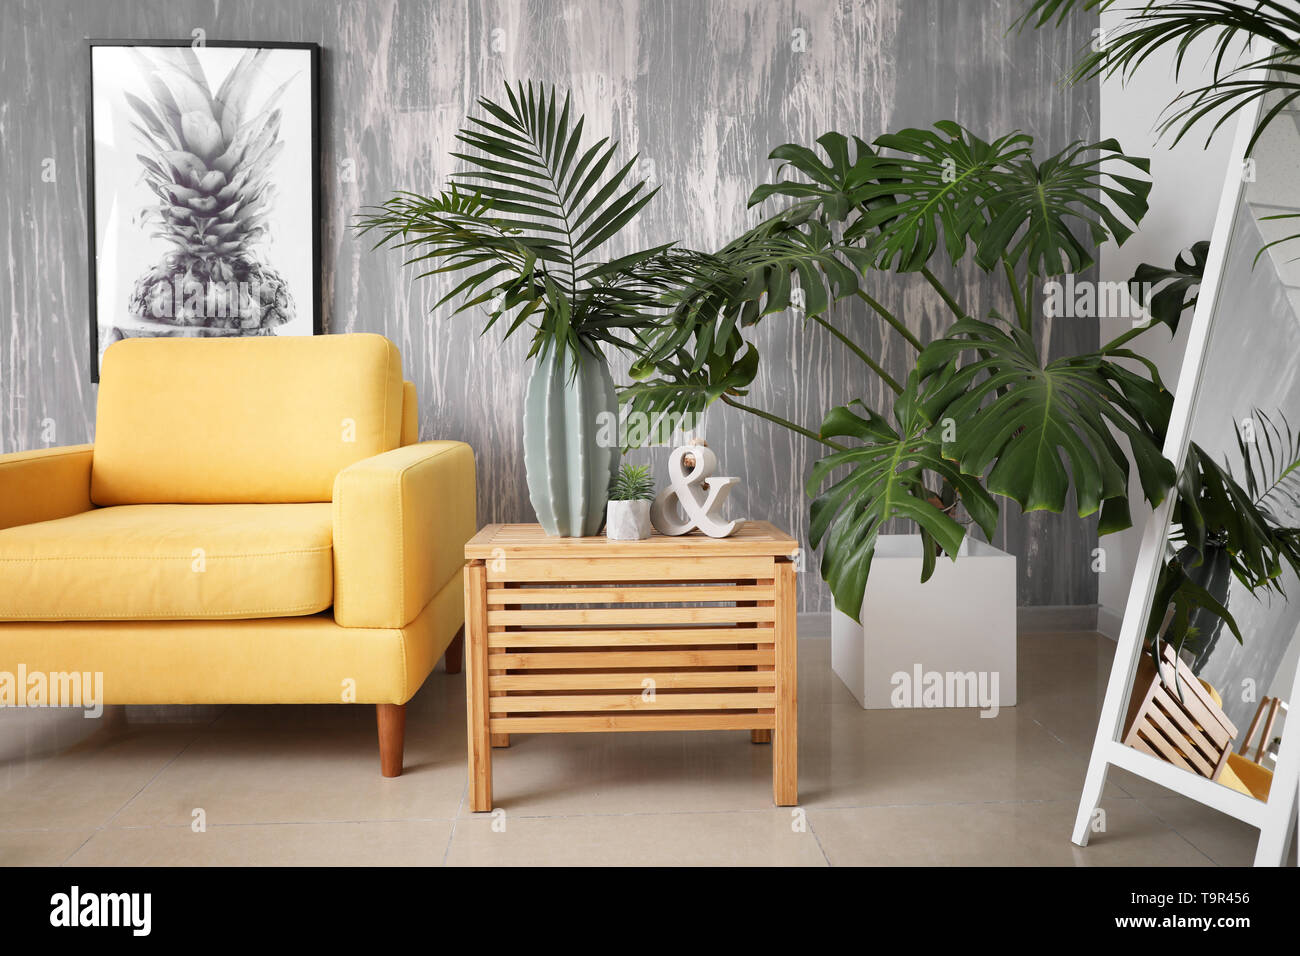 Green Tropical Plants In Interior Of Living Room Stock Photo